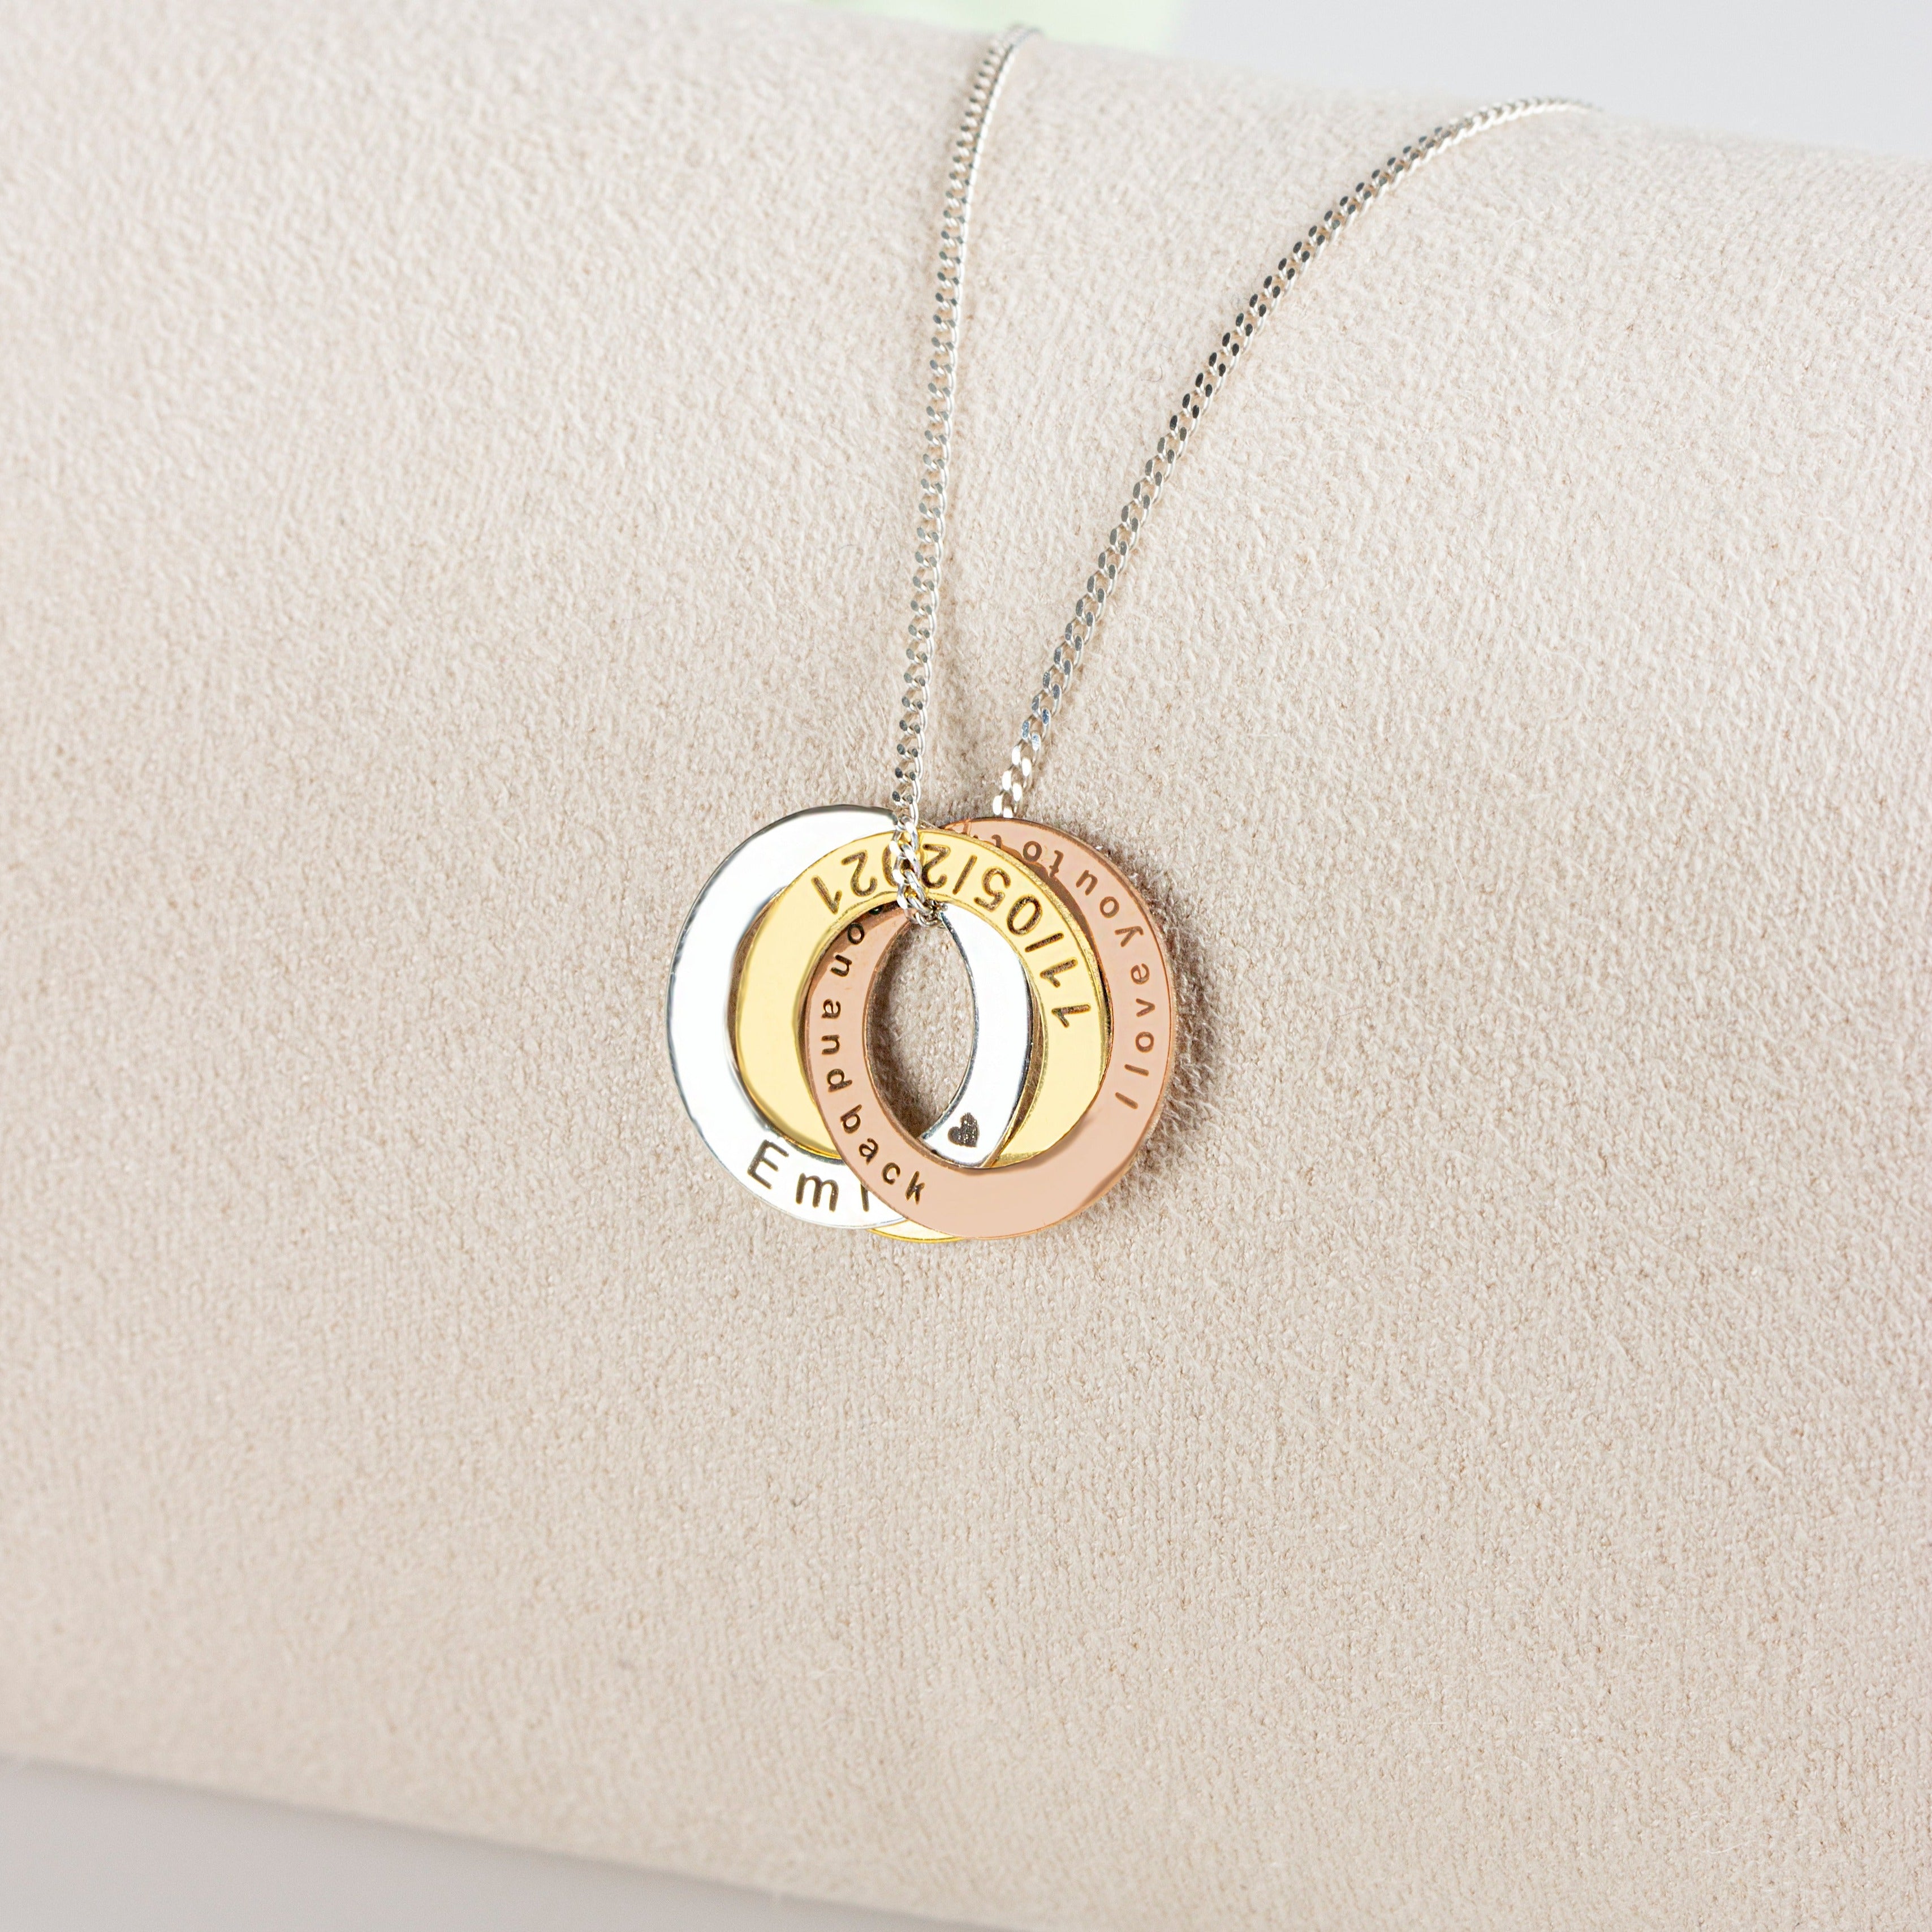 Personalised Posh Totty Designs Circle Necklace | GettingPersonal.co.uk